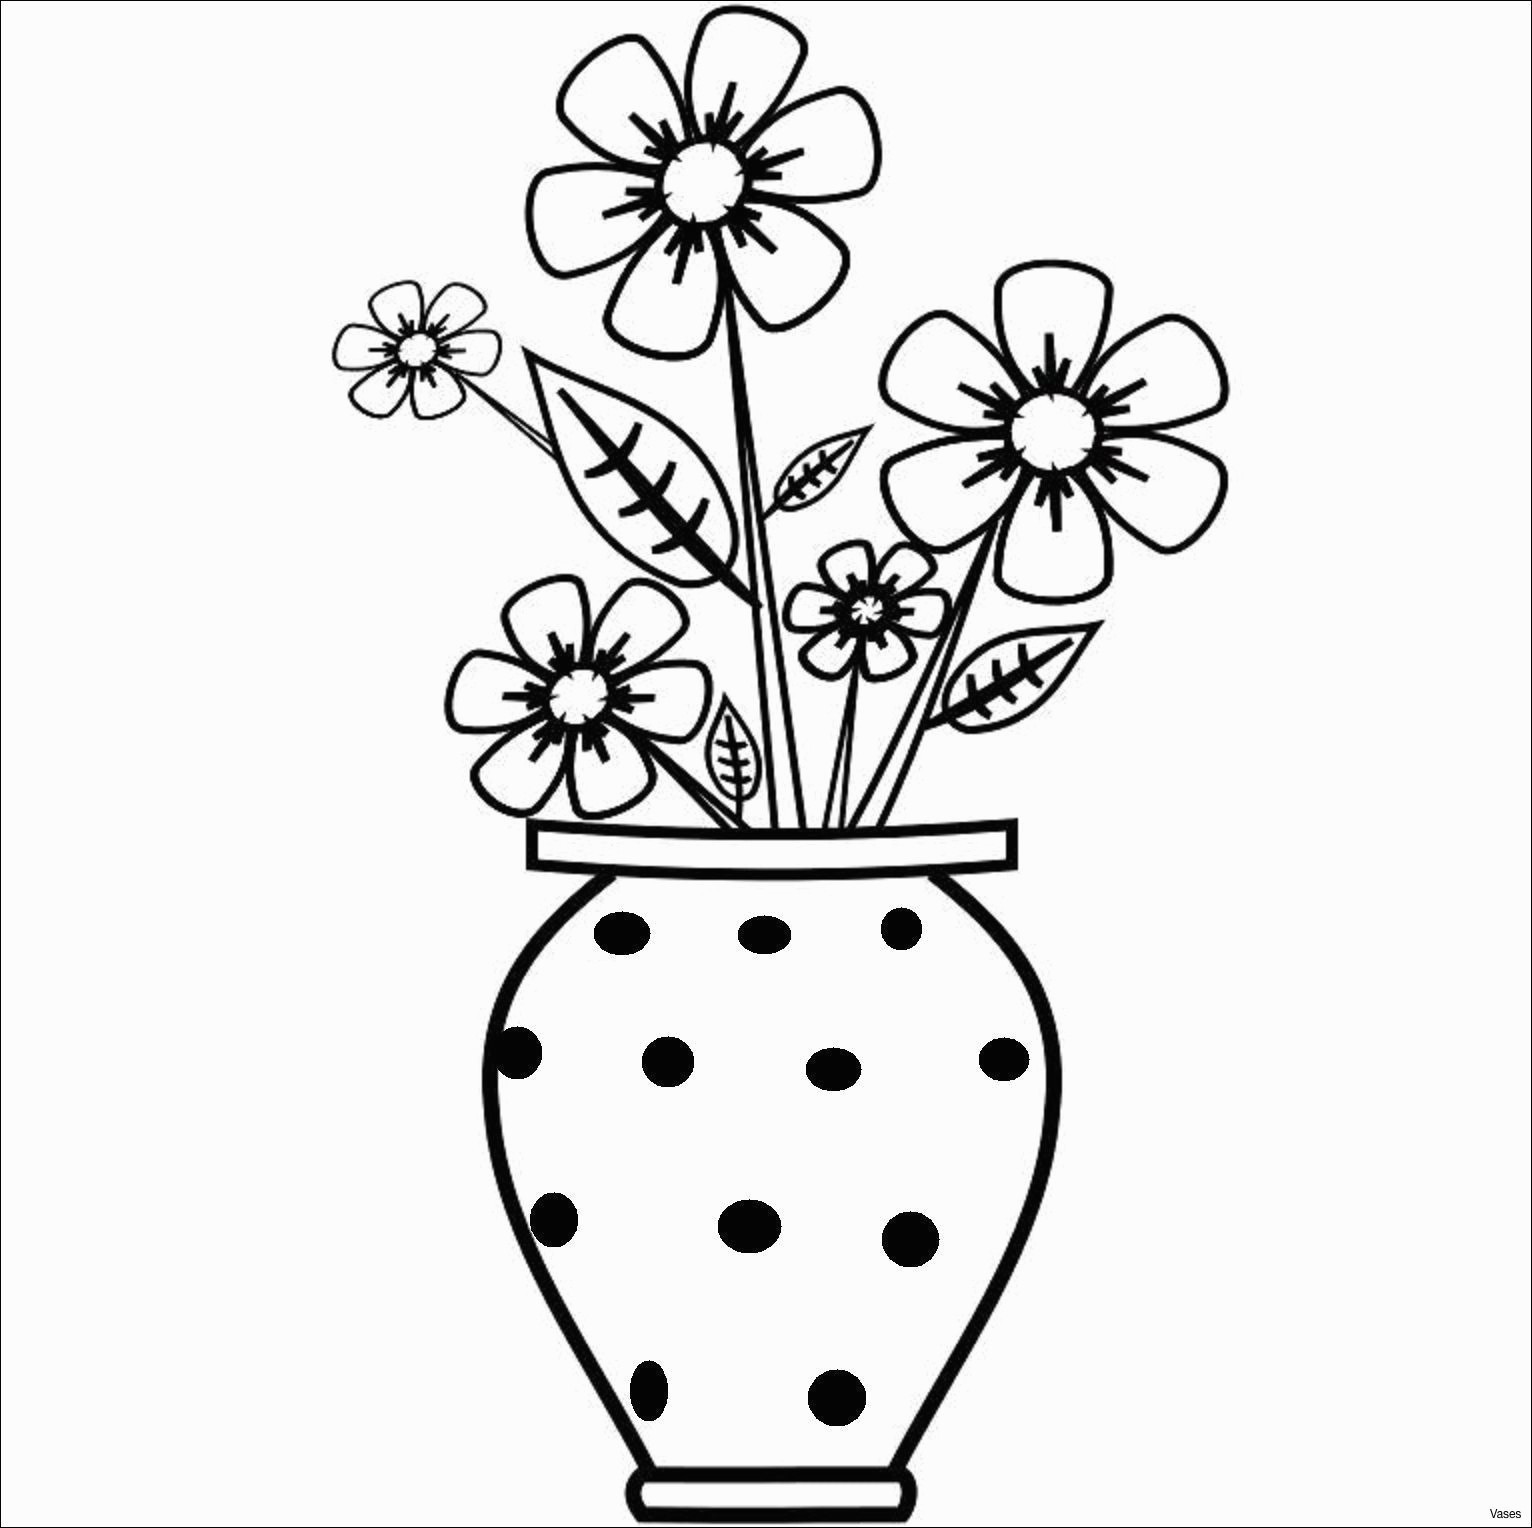 Hard Flowers Coloring Pages - Coloring Home